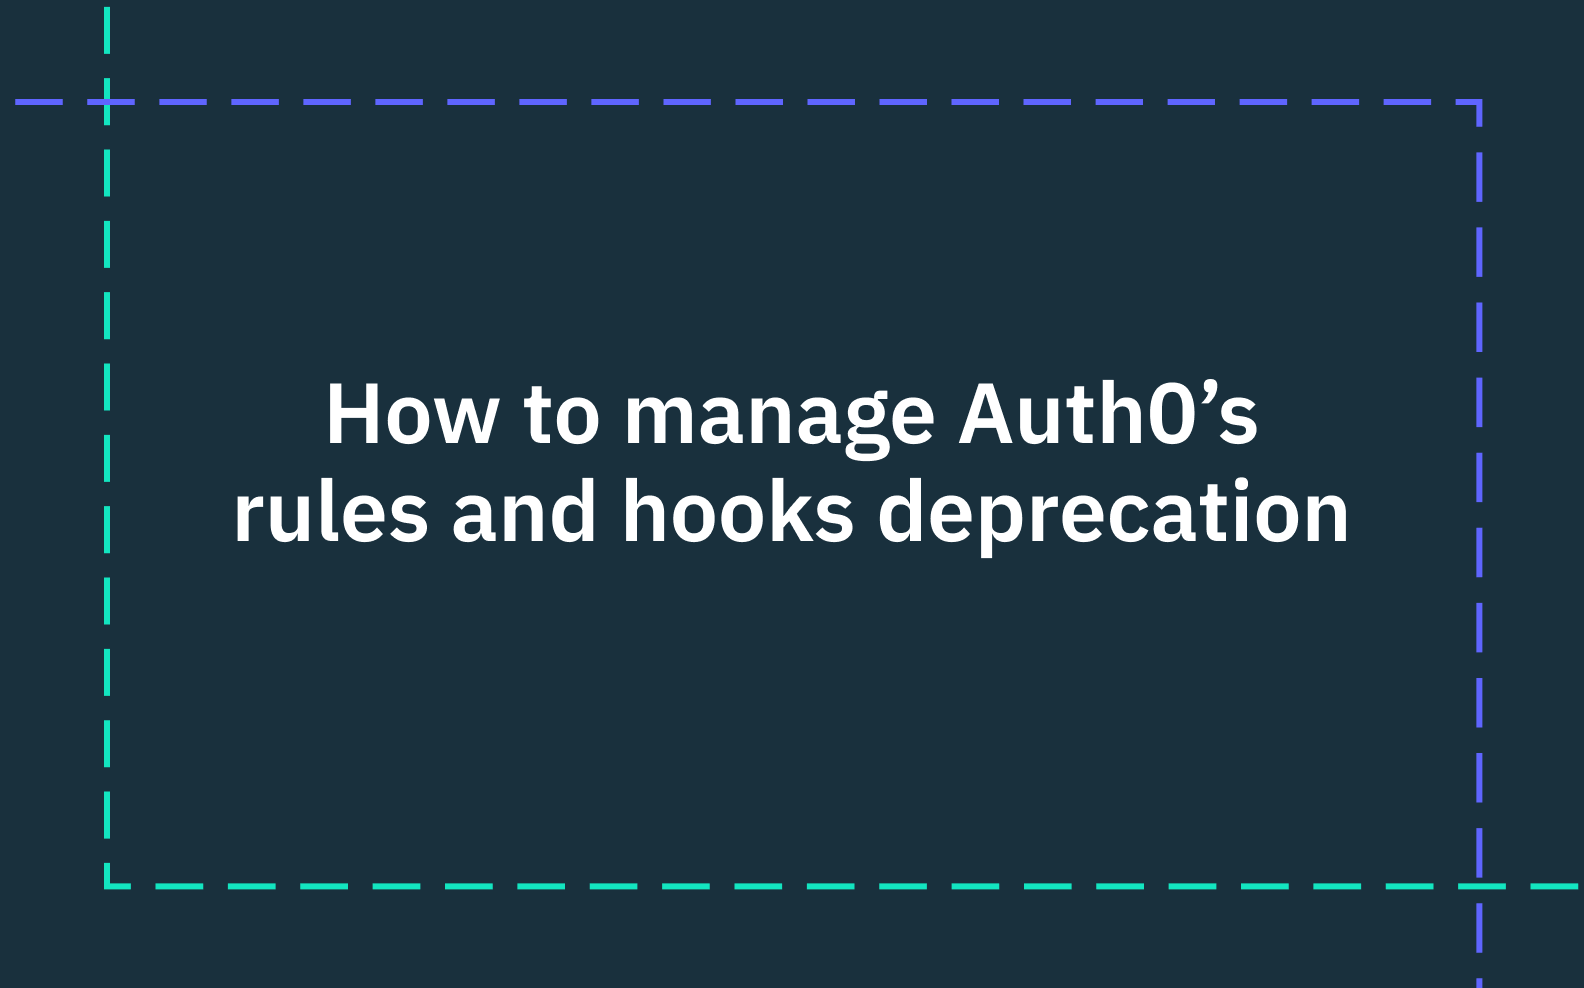 "How to manage Auth0 s rules and hooks deprecation"